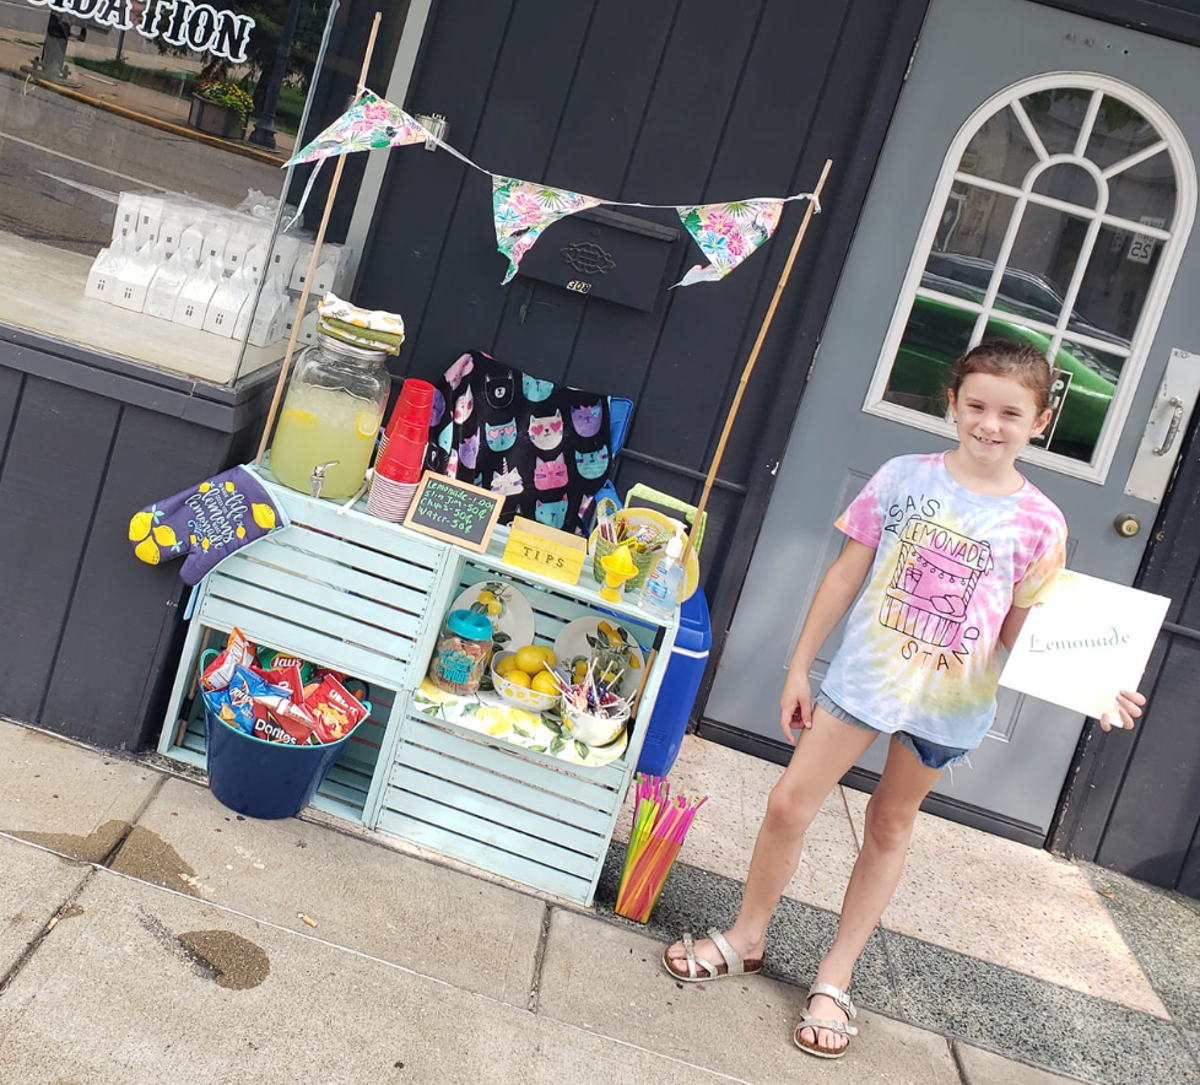 Little girl’s lemonade stand without permit is shut down by police 